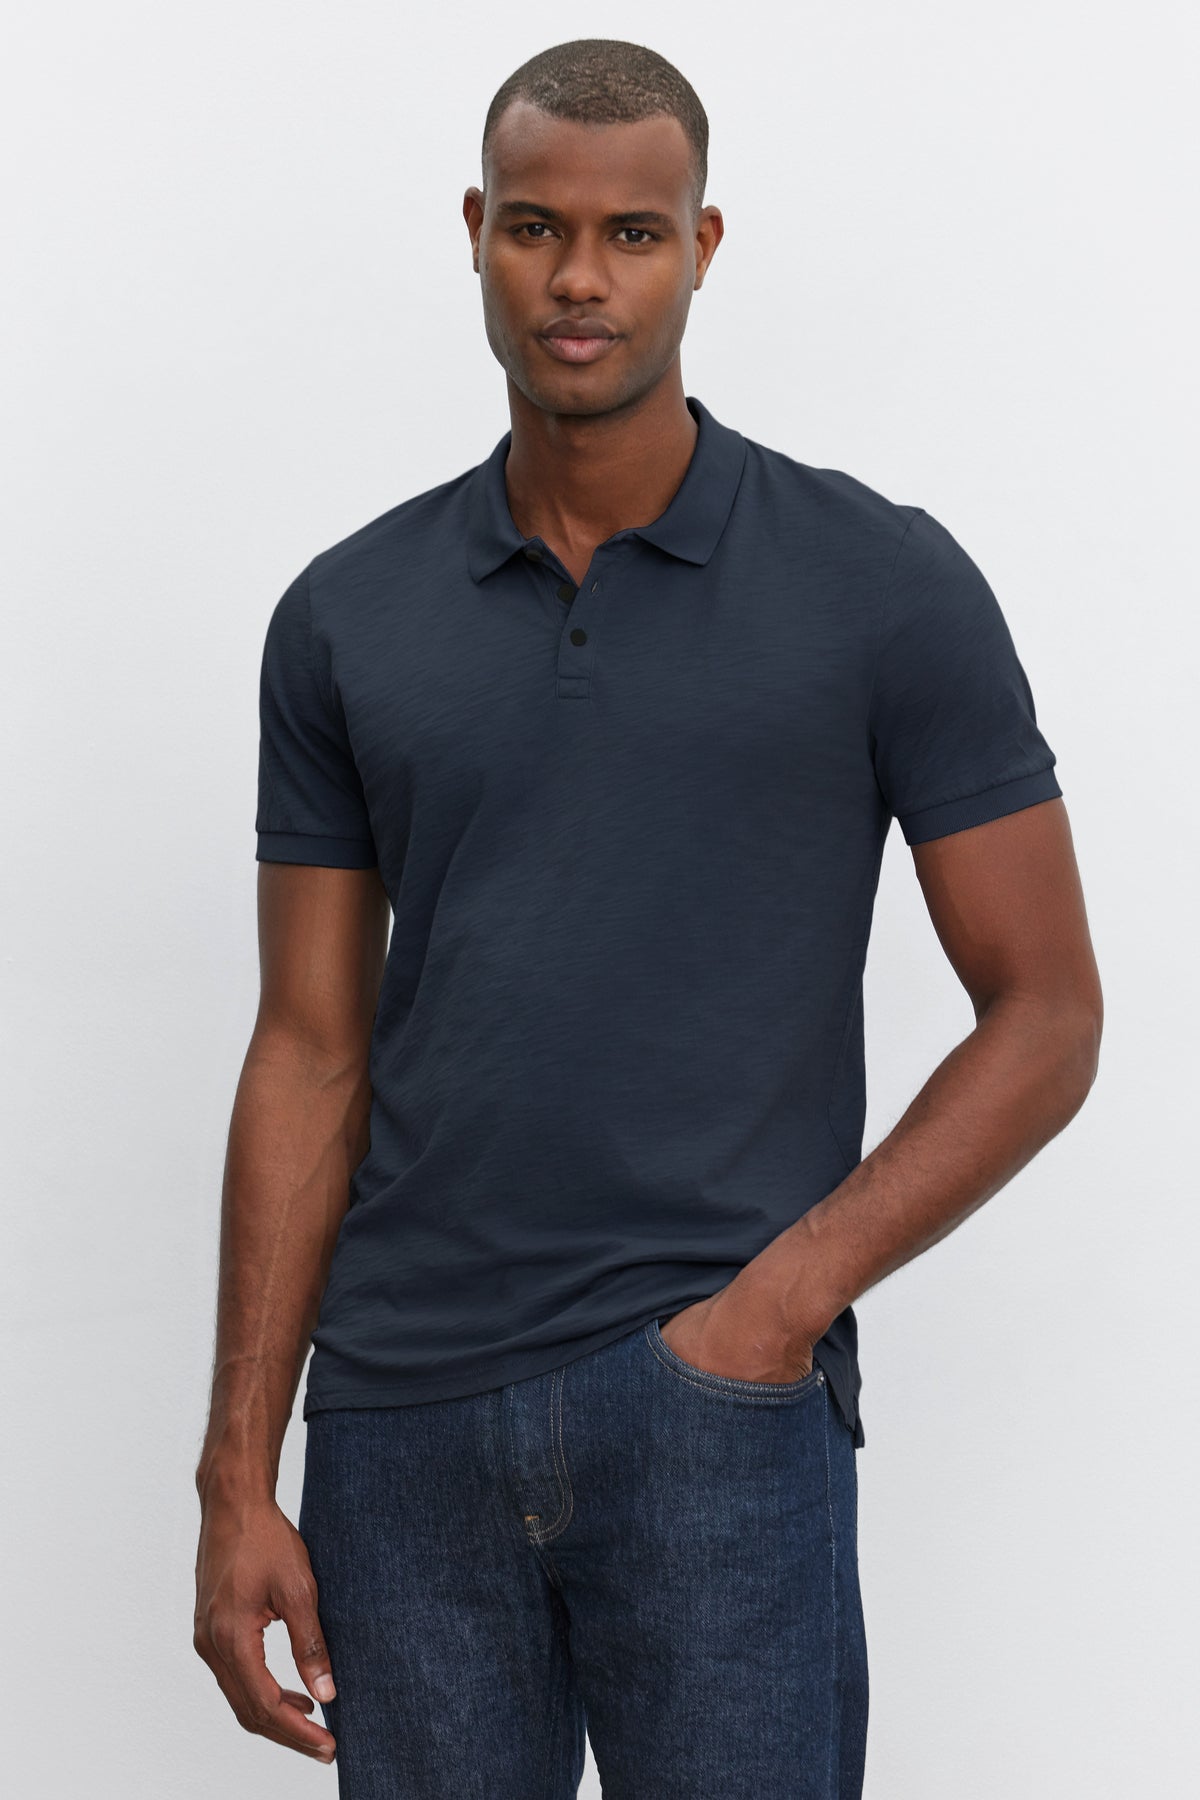 A man wearing a Dark Gray Cotton Slub NIKO POLO shirt from Velvet by Graham & Spencer stands against a plain white background, looking directly at the camera.-36890752745665